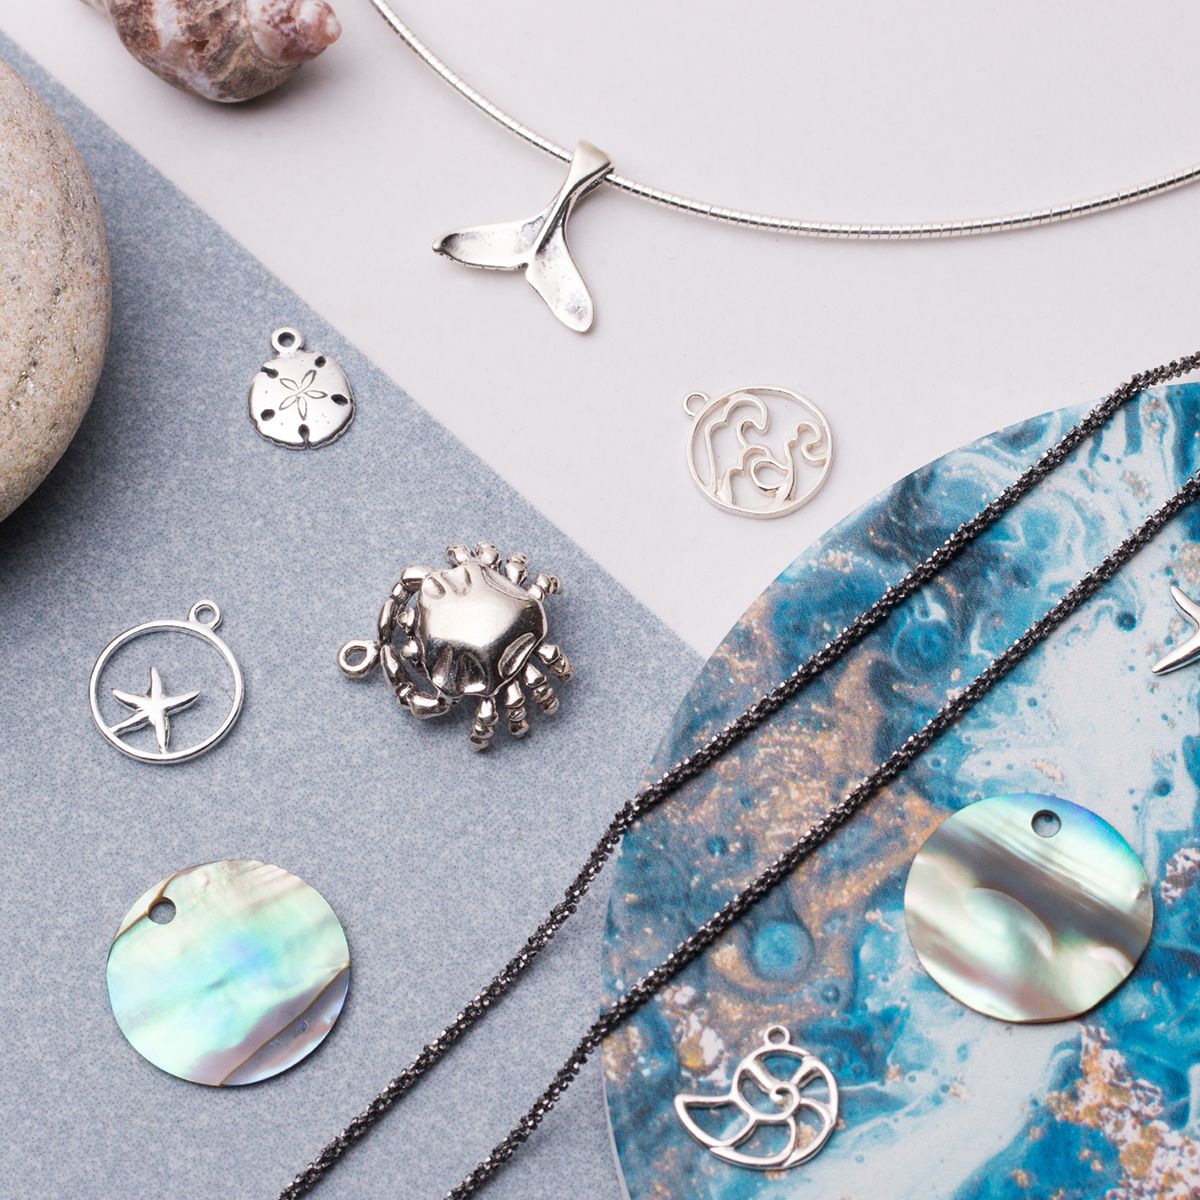 12 Good Luck Charms To Add To Your Jewellery